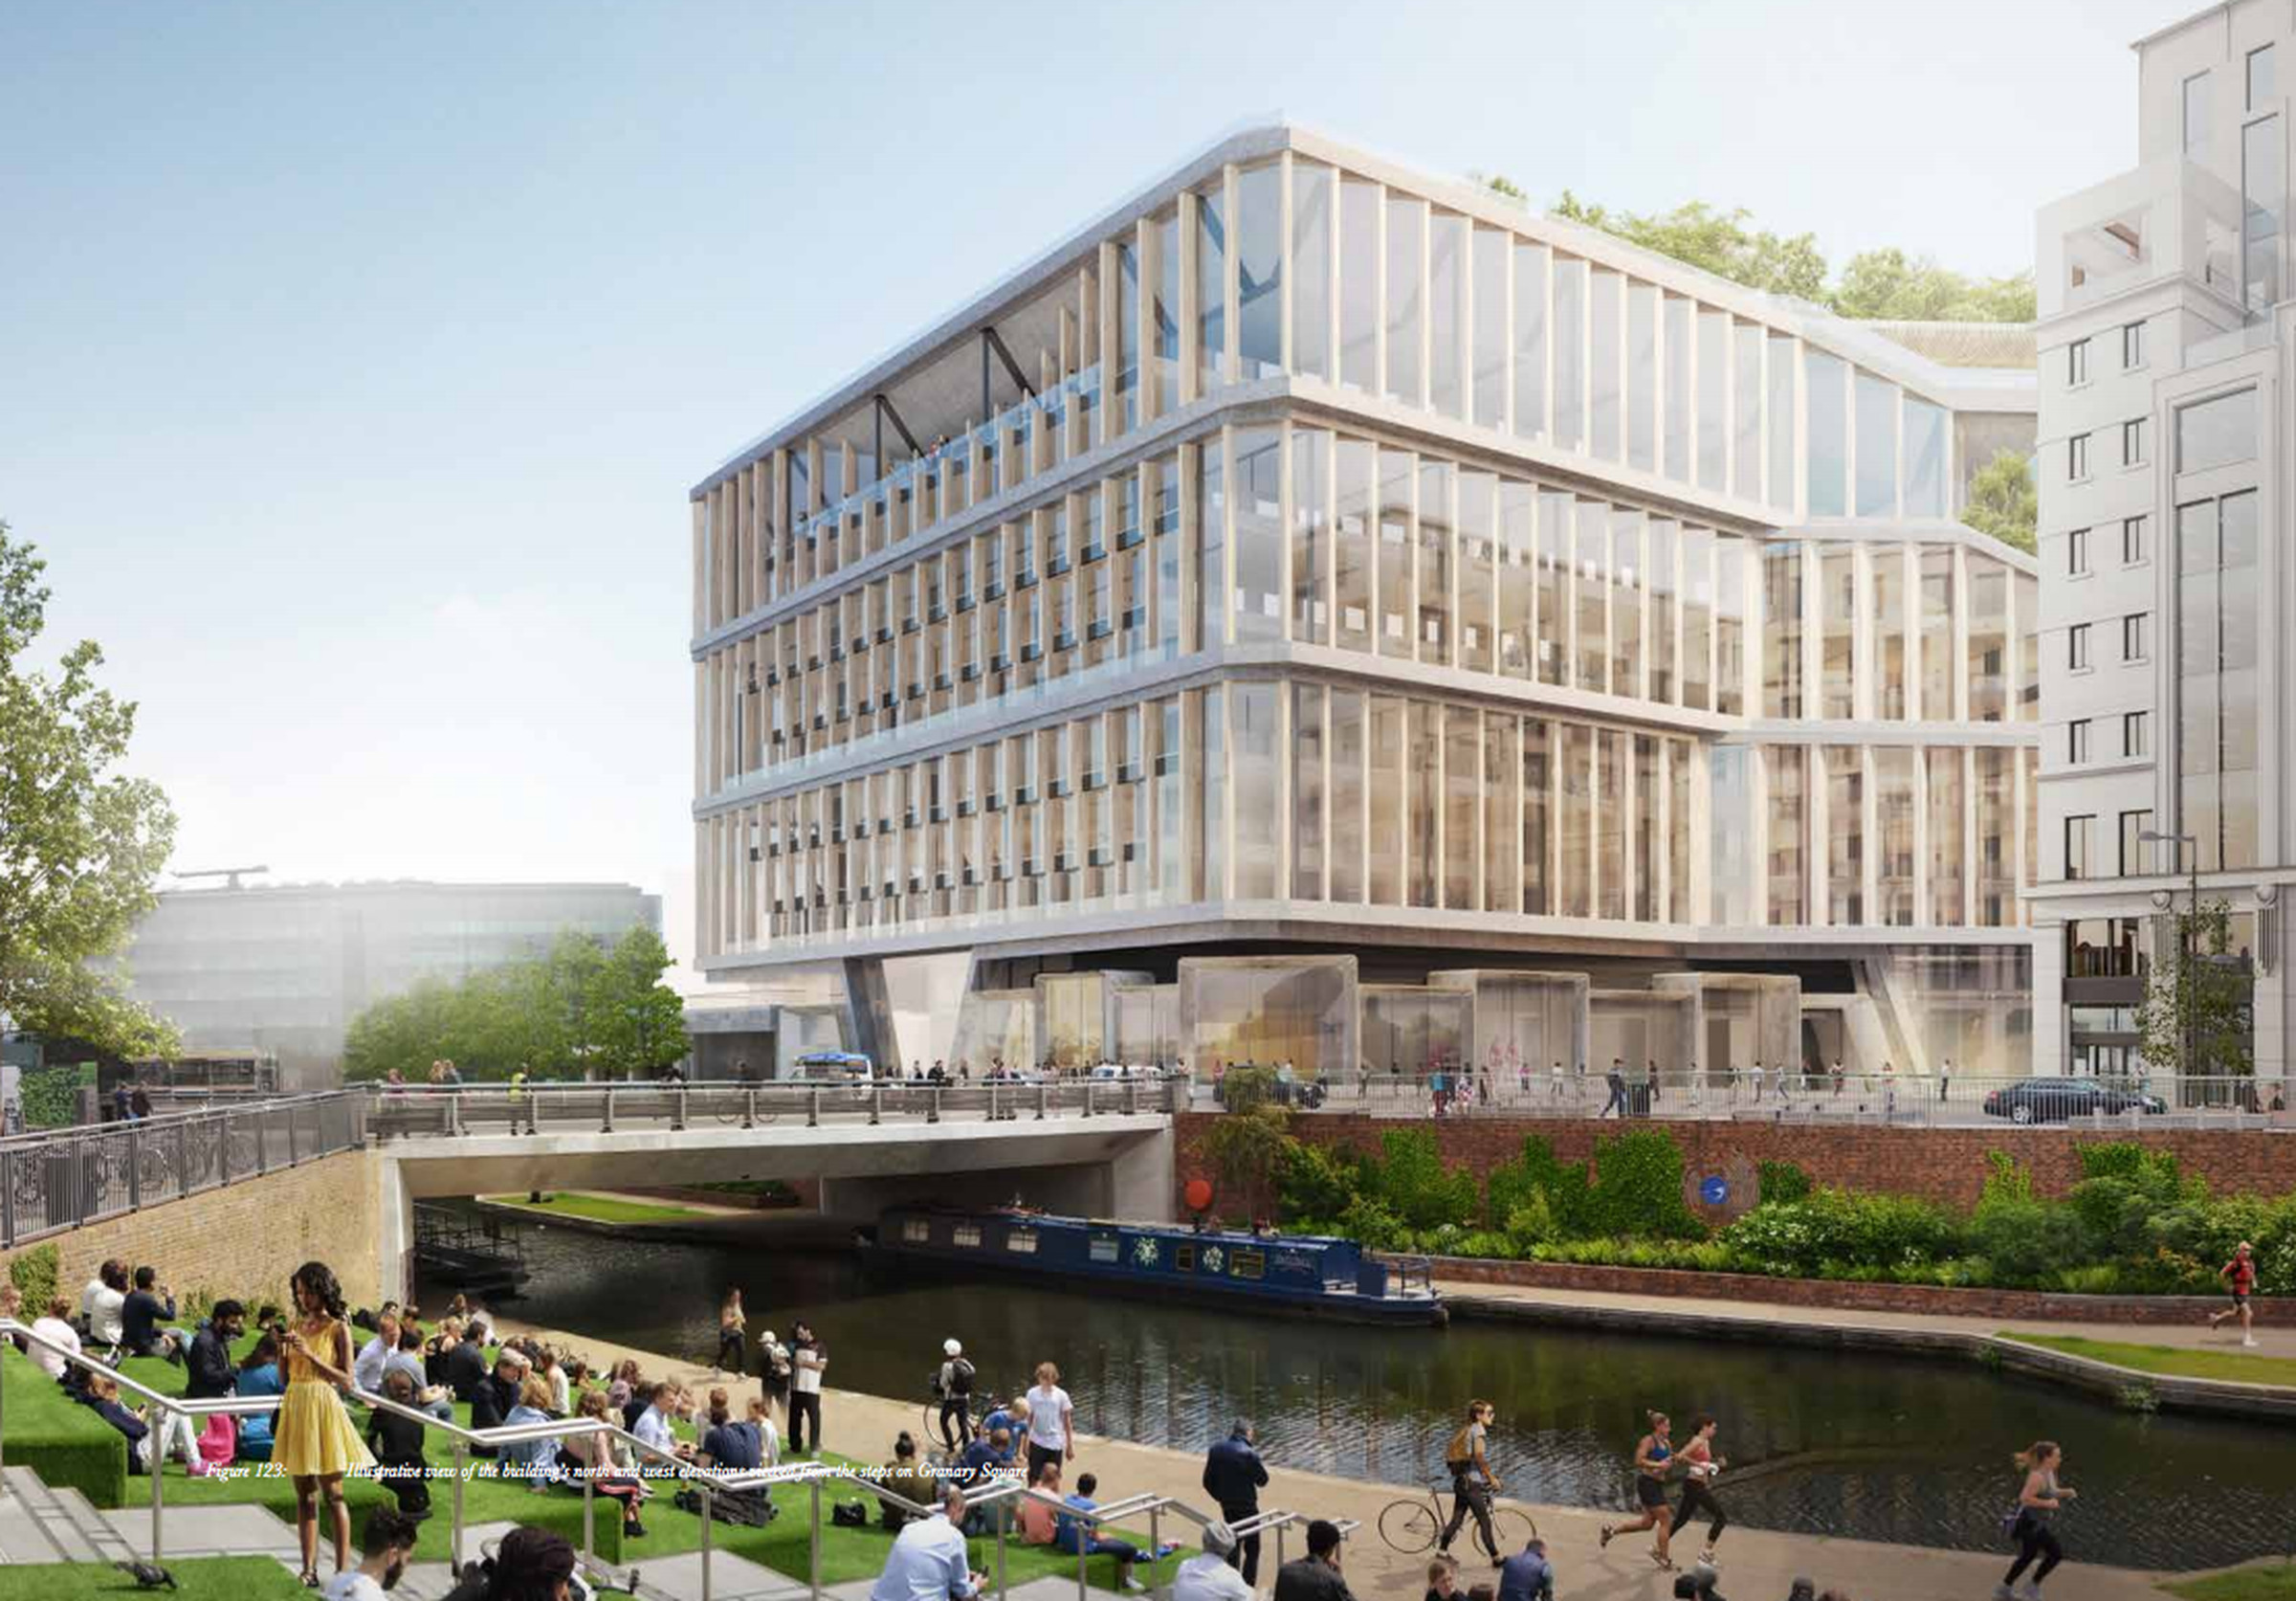 Parts of the building will overlook canals in the Kings Cross area.